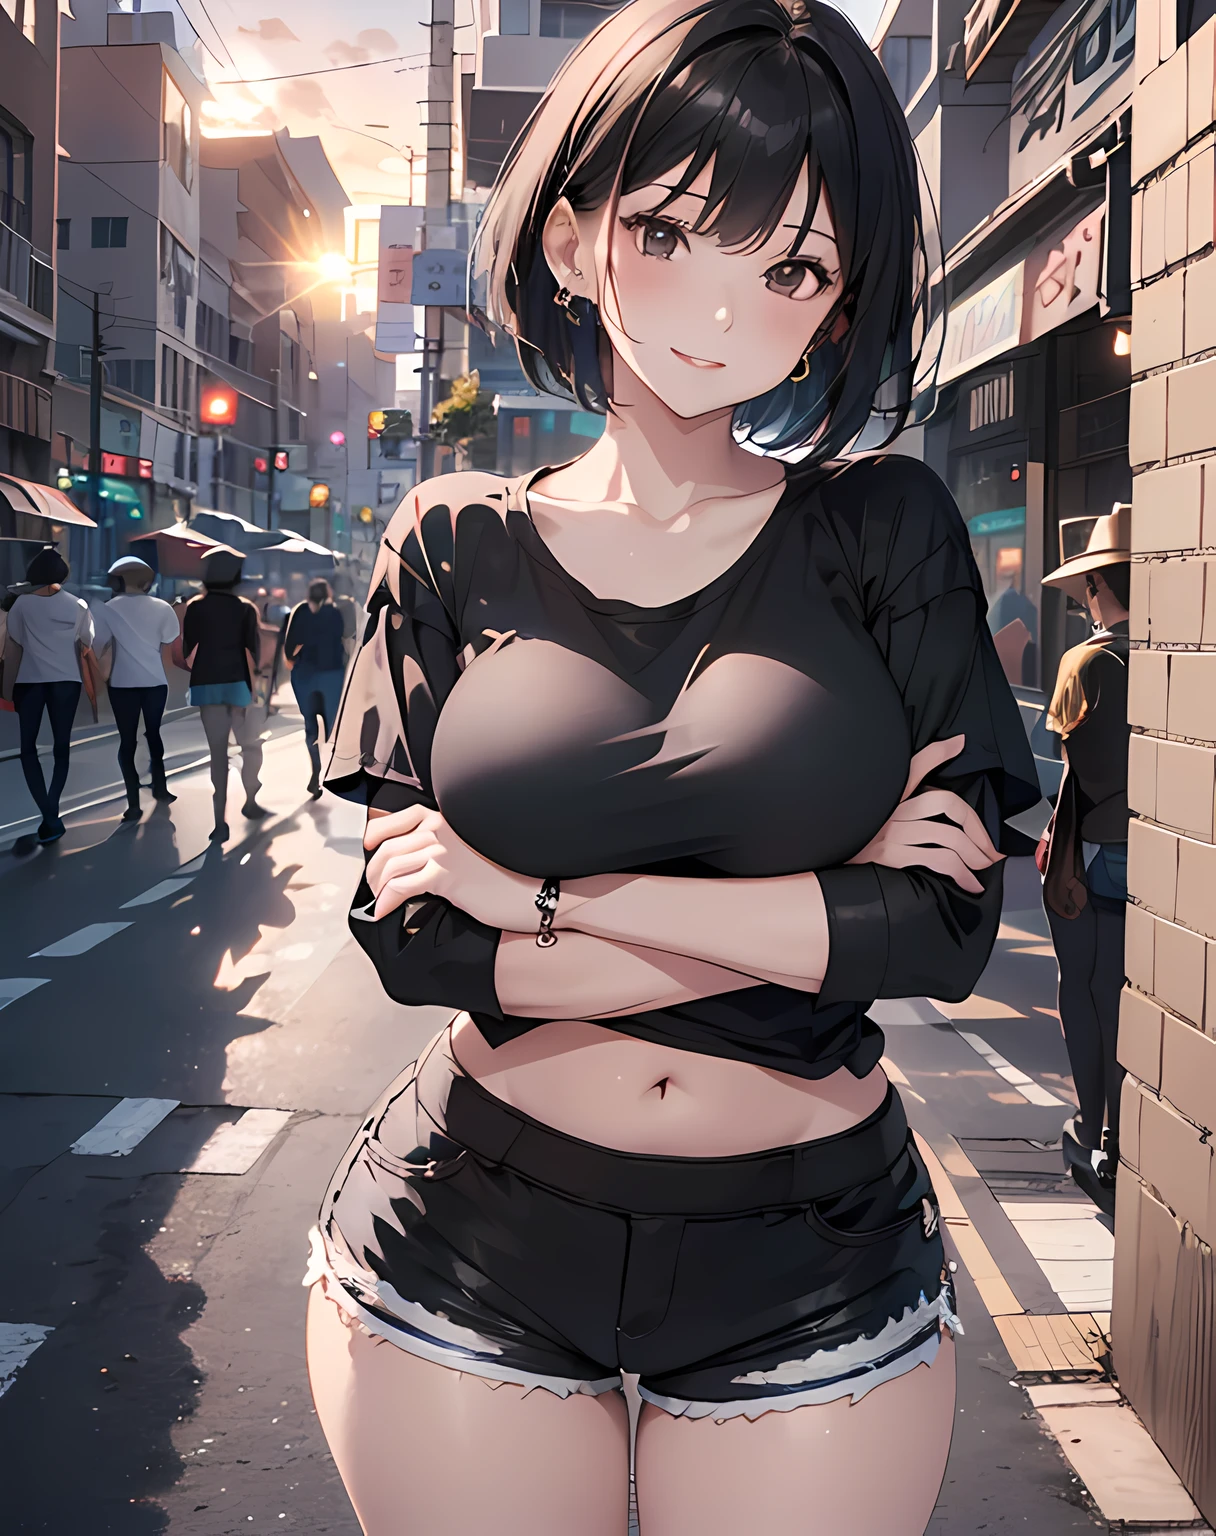 (((face close-up image:1.5, from below, POV, crossed arms on stomach, holding own breasts, grabbing own breast))), (masterpiece, best quality:1.37), highres, ultra-detailed, ultra-sharp, BREAK, Korean school idol, (((1girl:1.37, solo))), (beautiful anime face, cute face, detailed face), (black hair:1.3, thin hair:1.3, (((extremely short hair:1.3))), bob-cut hair style:1.3, bangs, hime-cut), detailed beautiful cyan eyes, BREAK, ((detailed black T-shirt:1.5, shorts:1.5)), BREAK, lovely look, earing, detailed clothes), light smile, closed mouth, parted lips, pink lipstick, BREAK, ((looking straight at you, cowboy shot)), detailed human hands, HDTV:1.2, ((detailed sunset Egypt downtown street venue background:1.3)), 8 life size, slender:1.15, anime style, anime style school girl, perfect anatomy, perfect proportion, inspiration from Kyoto animation and A-1 picture, late evening, excellent lighting, bright colors, clean lines, photorealistic